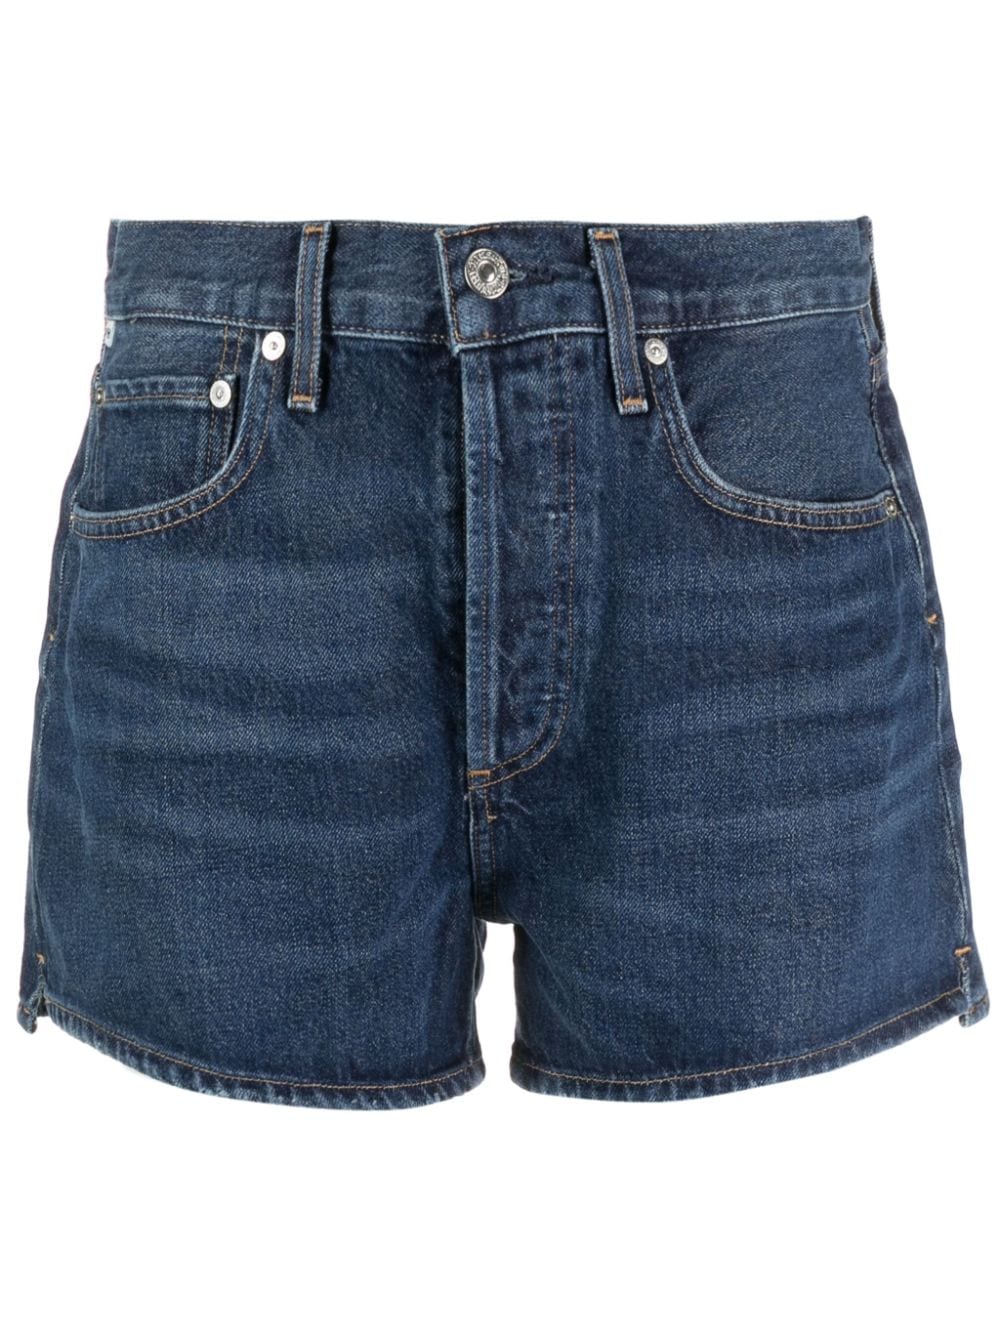 Image 1 of Citizens of Humanity Marlow Jeans-Shorts